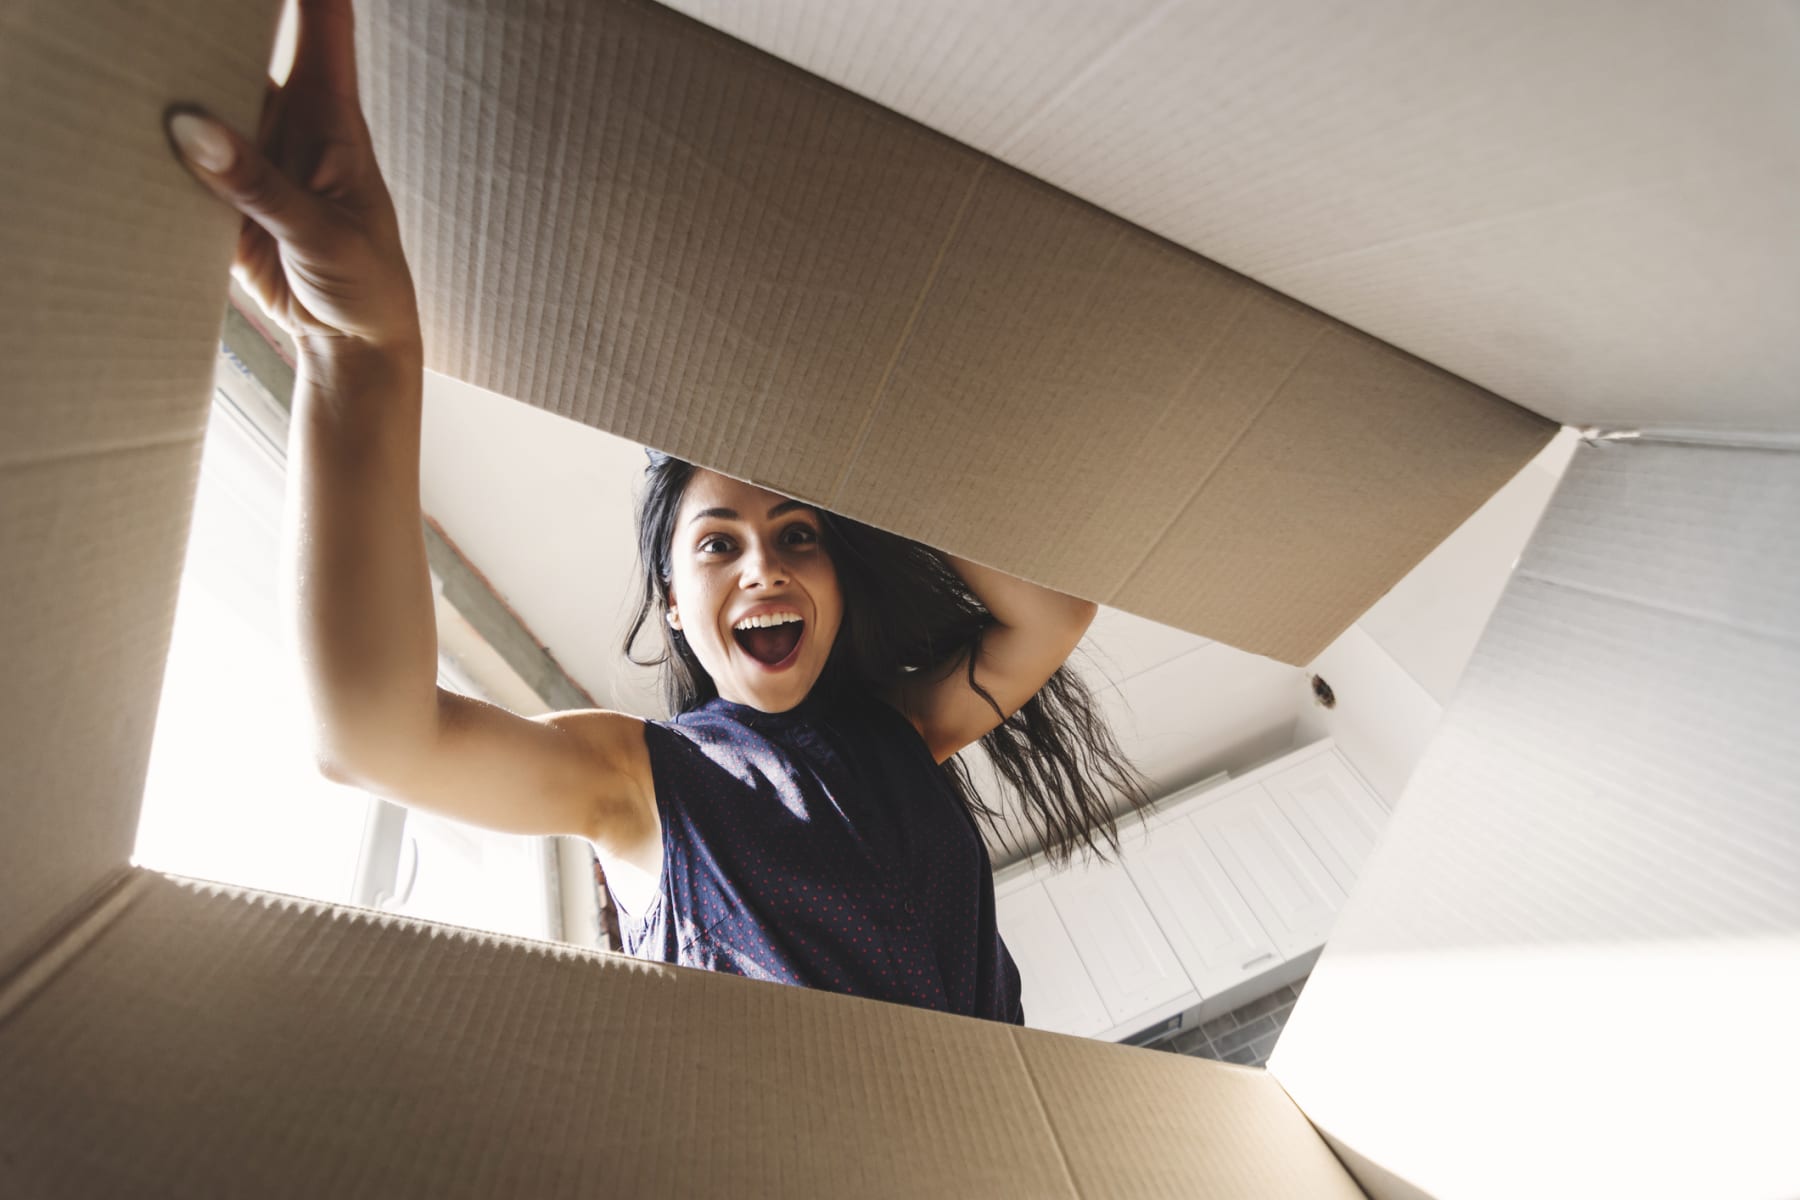 Smiling woman opening a cardboard box